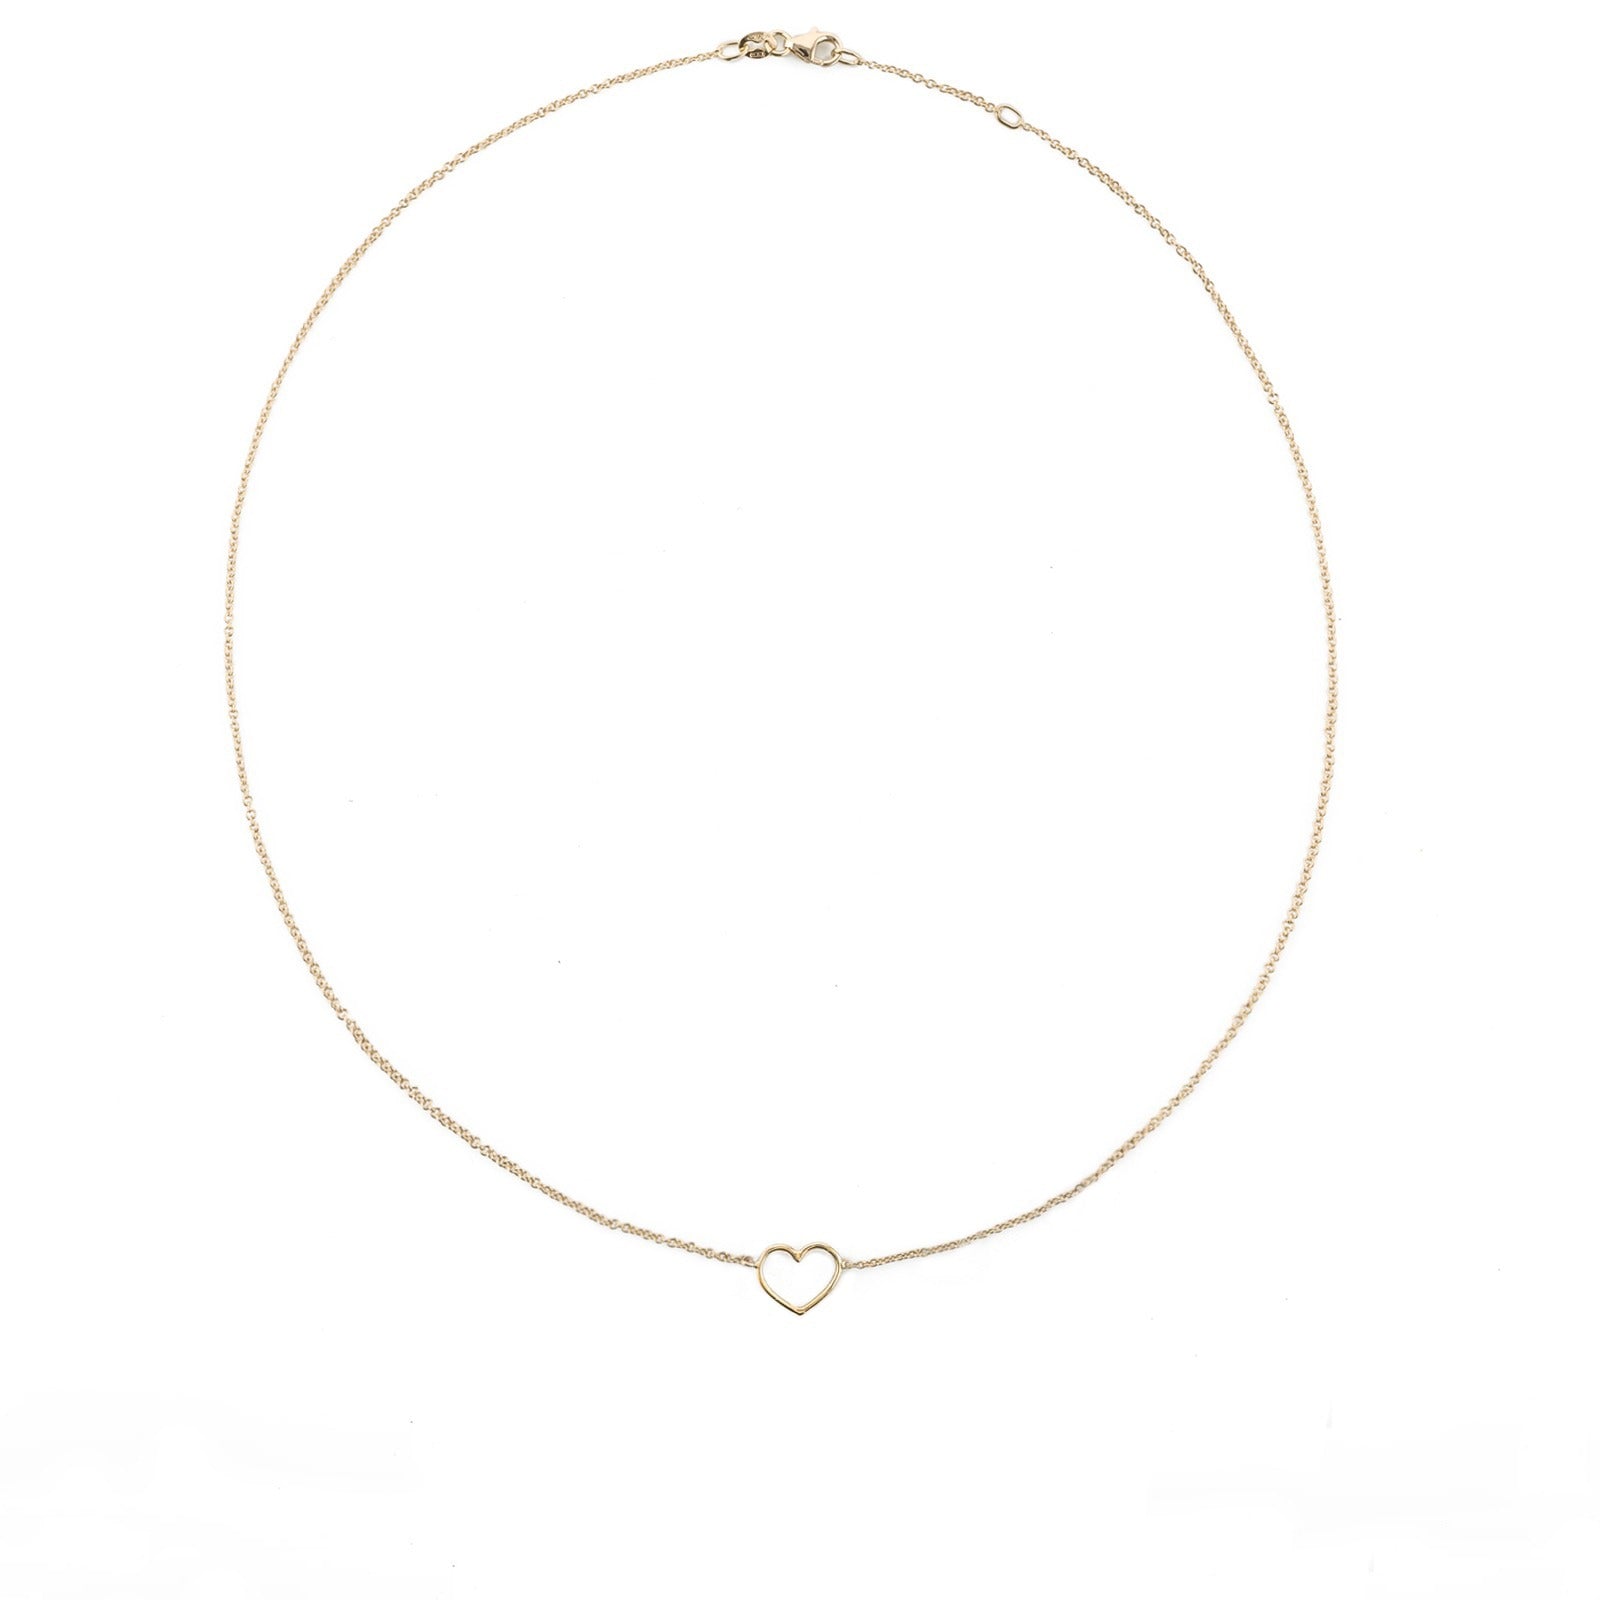 One element gold thread necklace